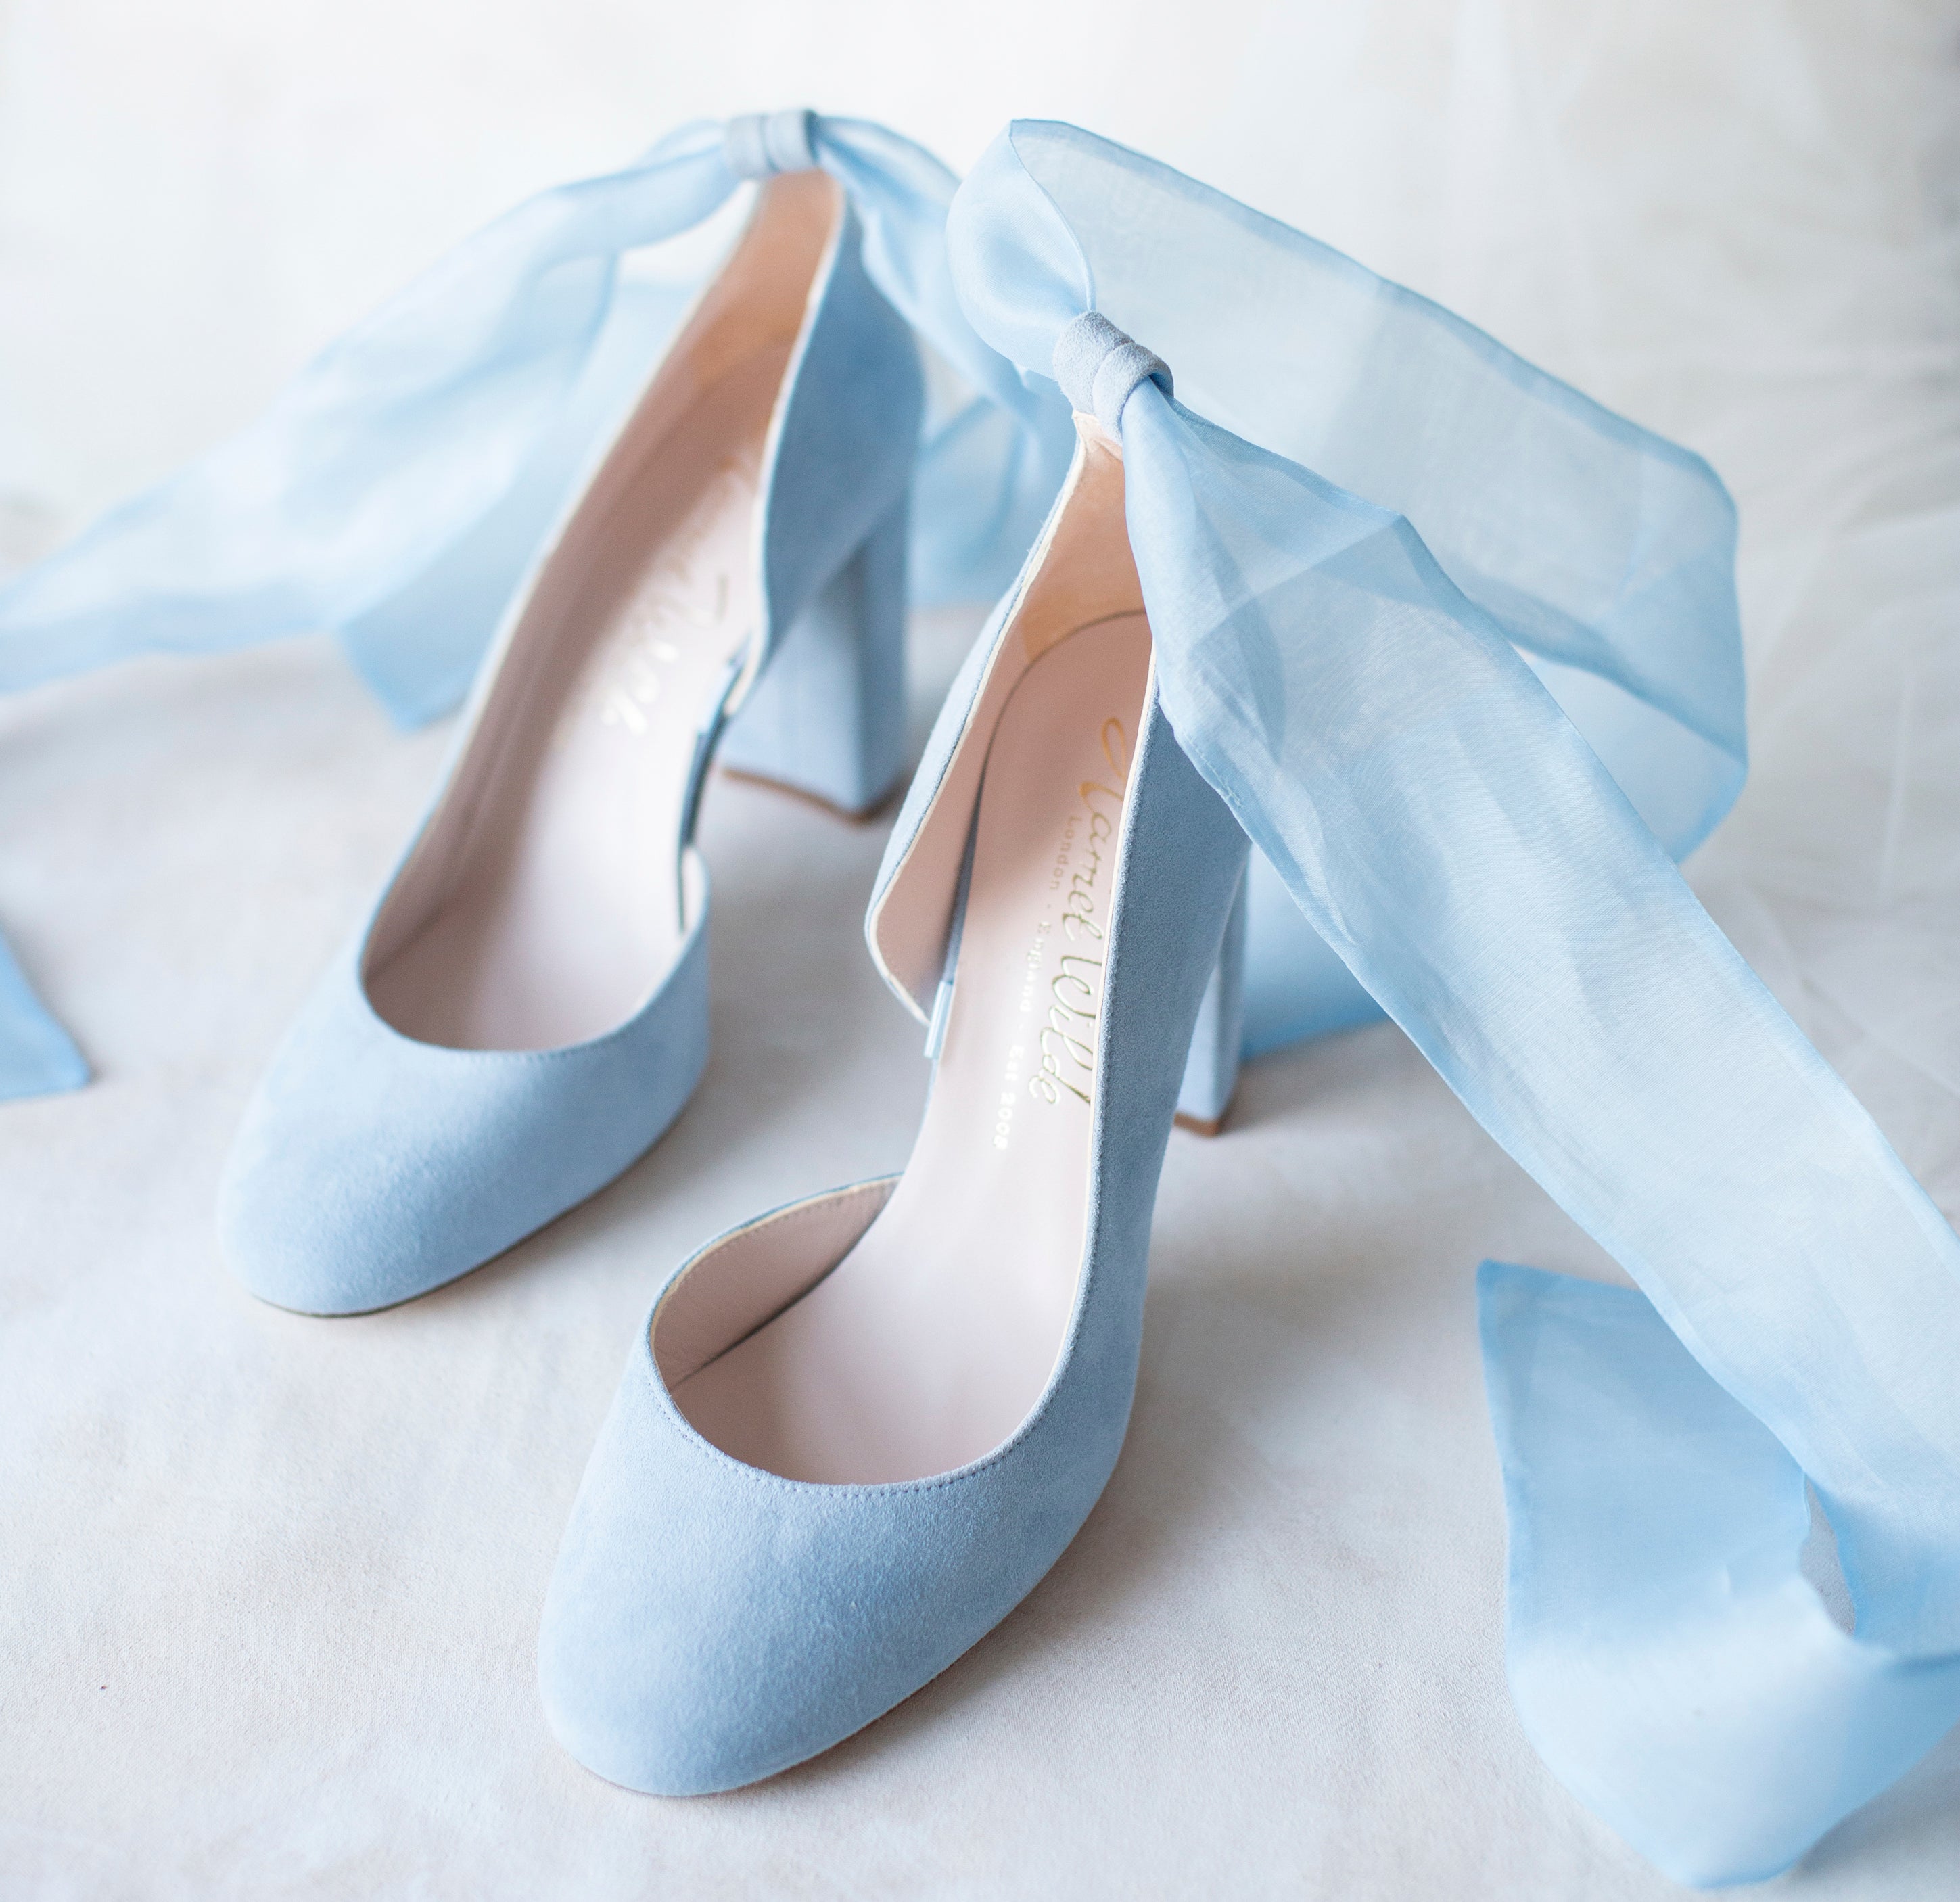 Hetty Blue Wedding Shoes - High Block Heel Blue Suede Bridal Shoes by ...